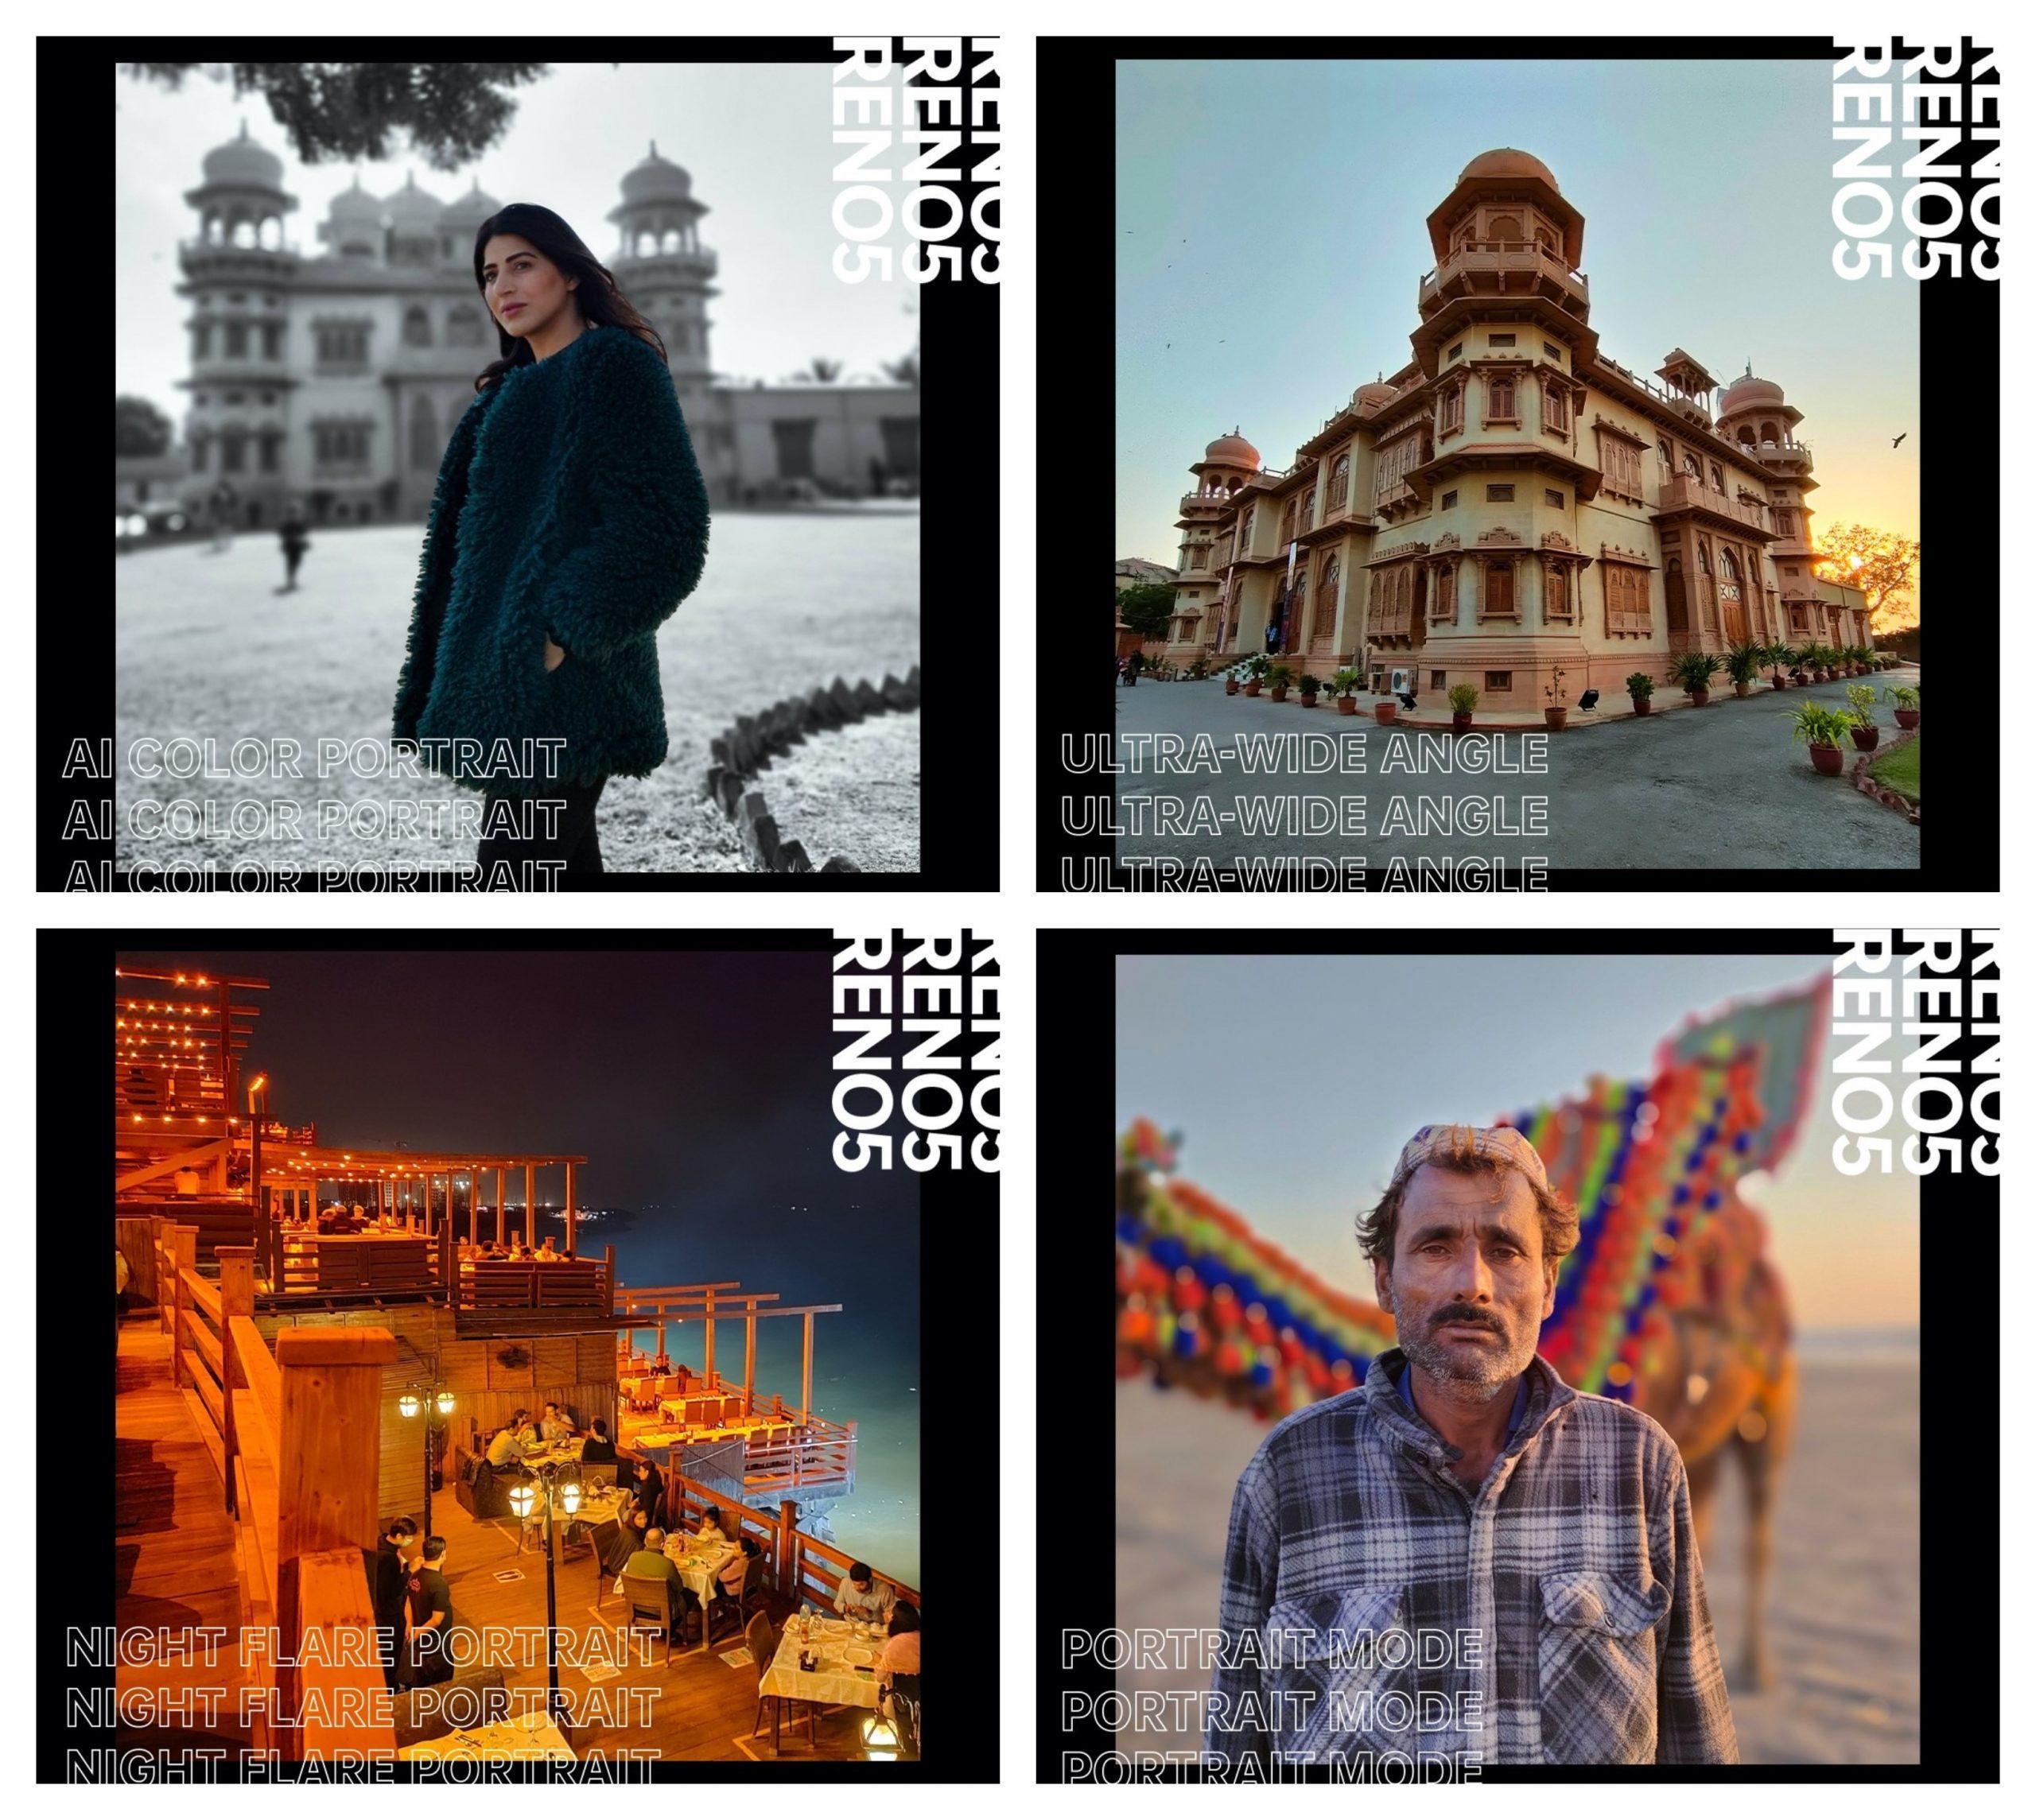 “Check out OPPO’s collaboration with talented Travel Photographer Ali Awais as he portrays the rich culture of Karachi in OPPO Gallery with the new OPPO Reno5”